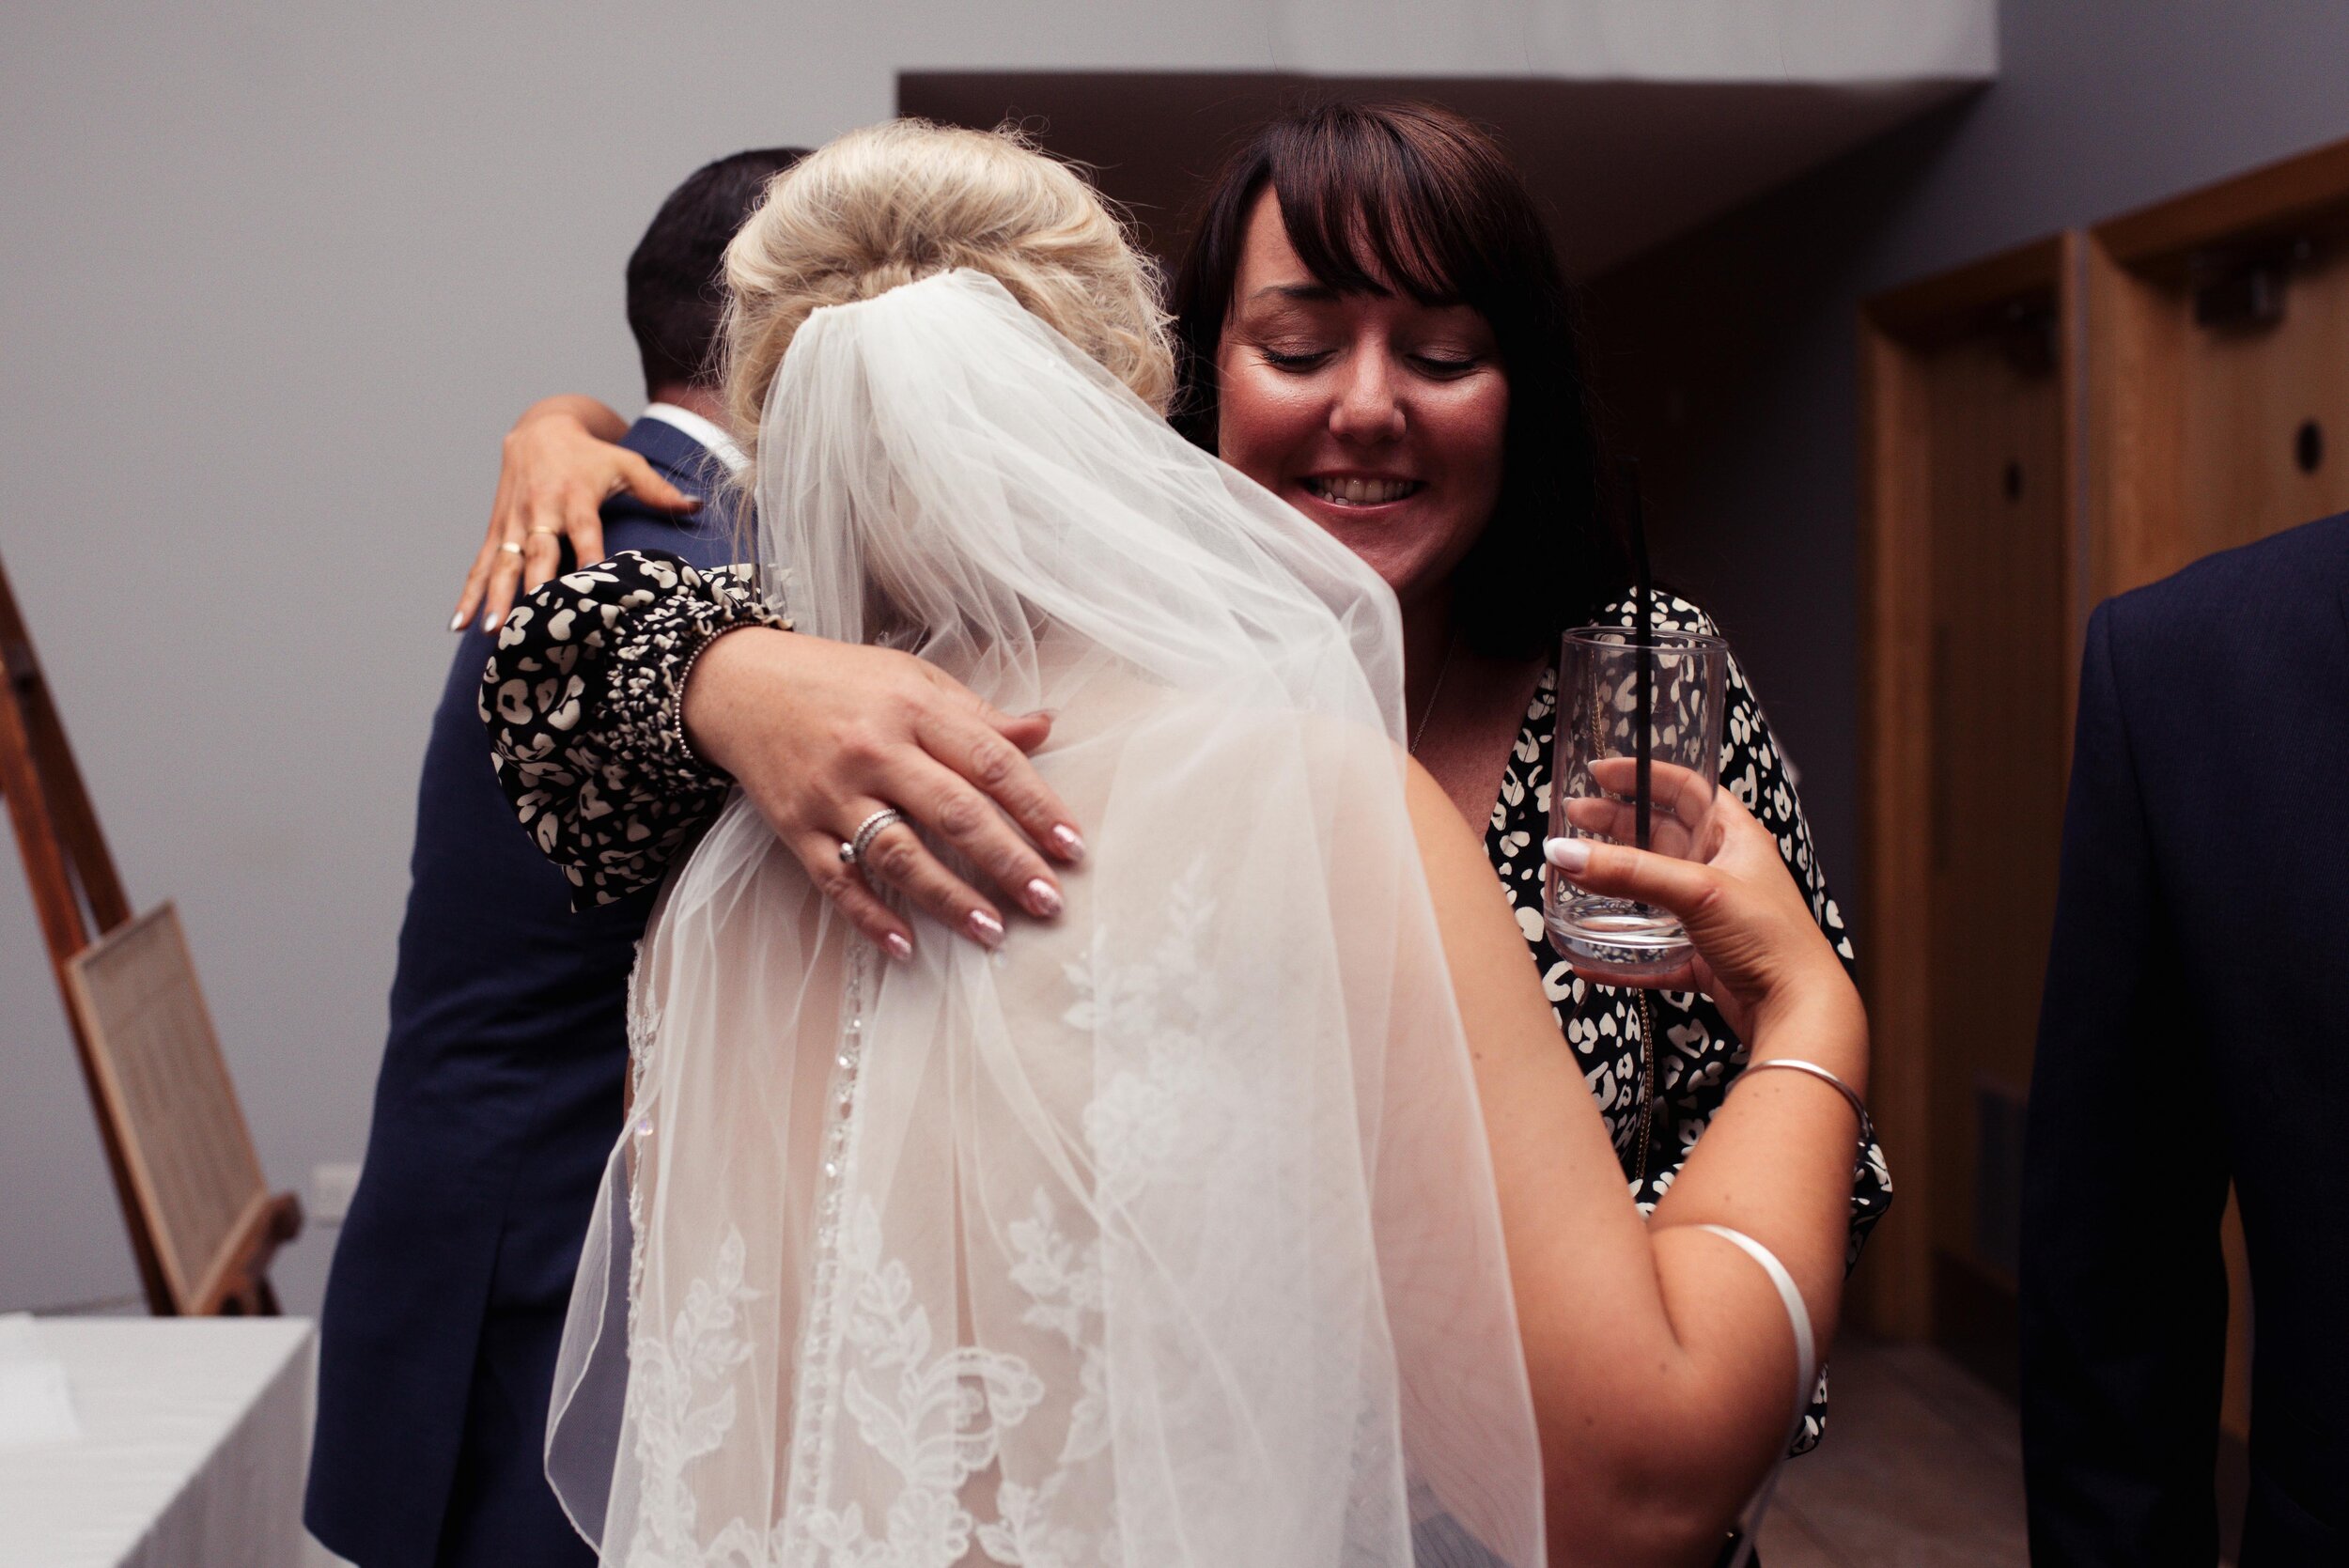 The bride gives one of the evening guests a big hug by the door